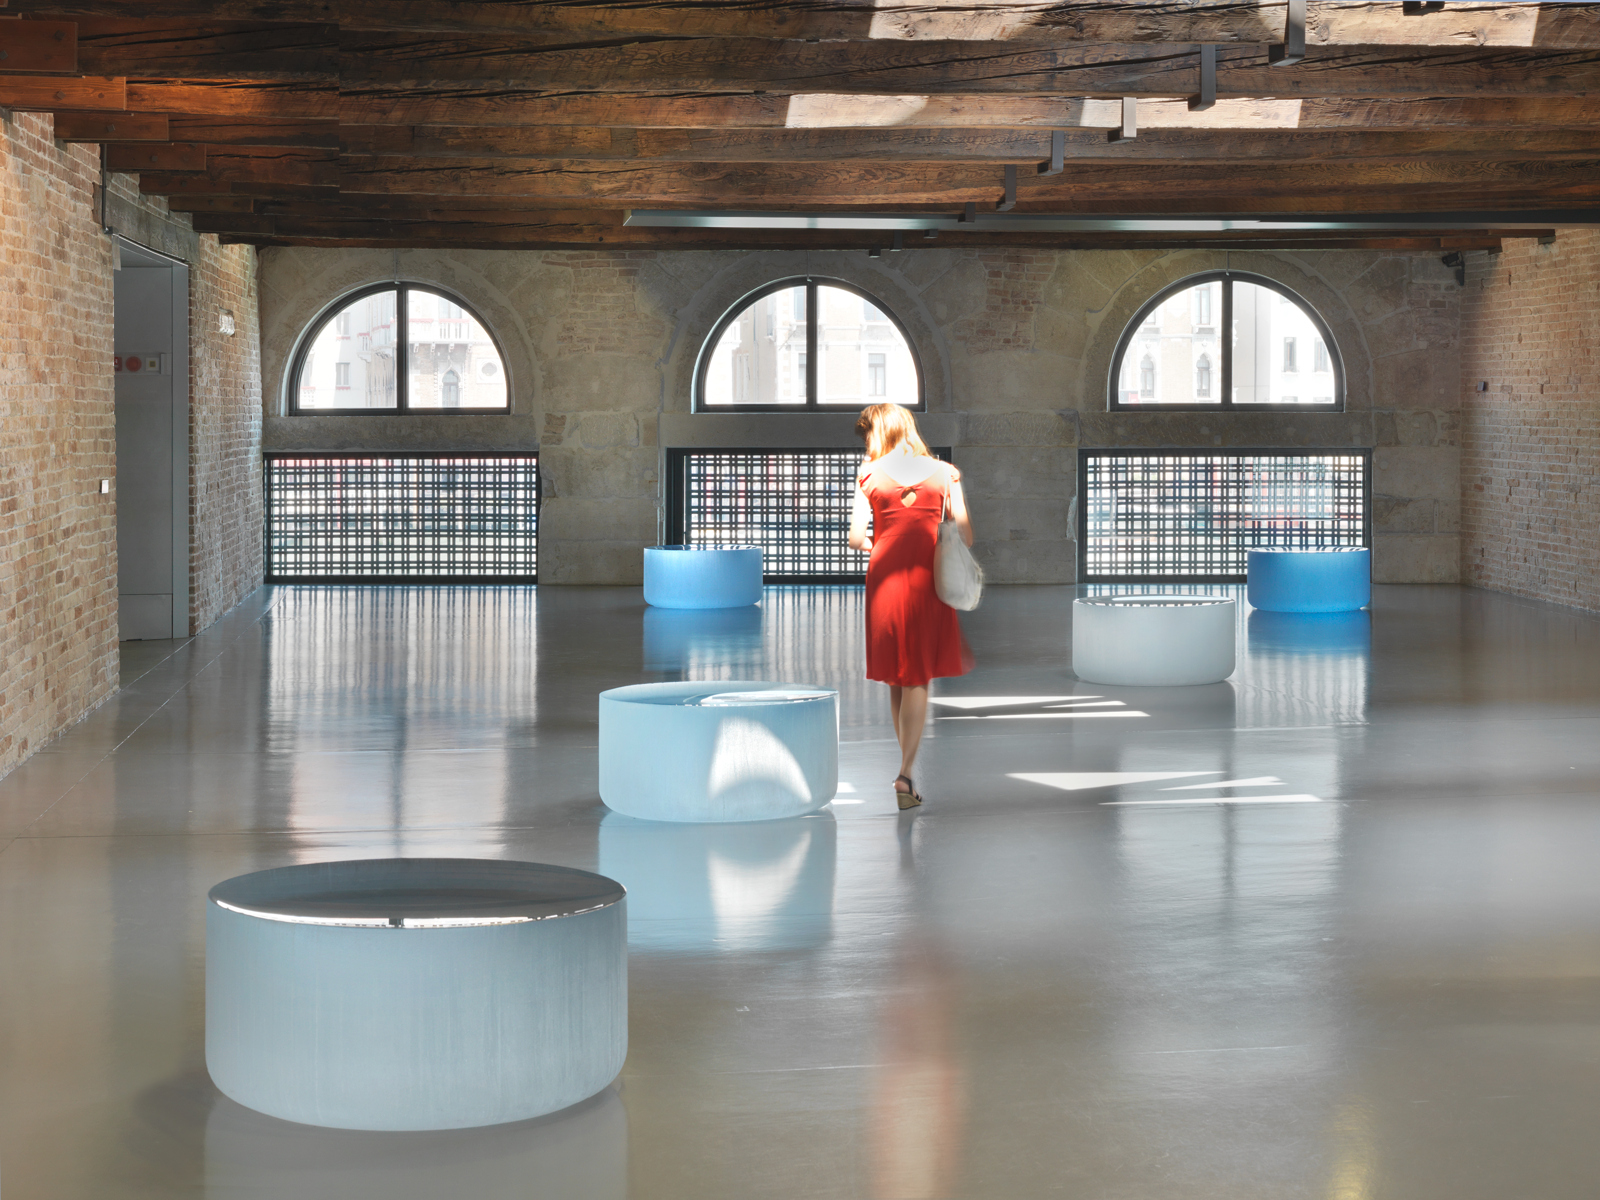 Roni Horn / "Well and Truly", installation view, "In Praise of Doubt", Punta Della Dogana, Venice, 2011 / 2009-2010